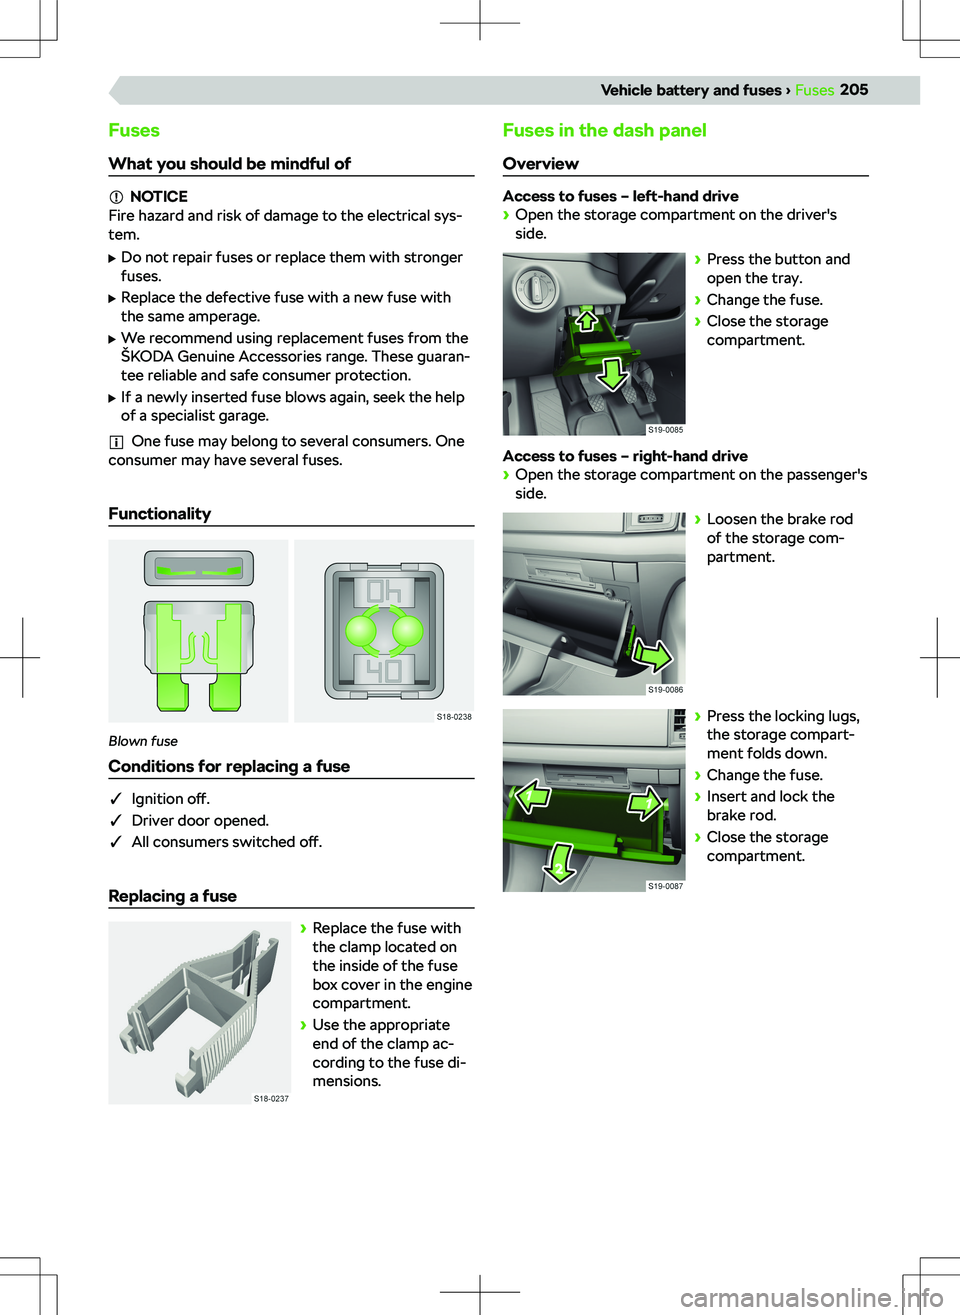 SKODA KODIAQ 2022  Owner´s Manual Fuses
What you should be mindful of
NOTICE
Fire hazard and risk of damage to the electrical sys-
tem.
